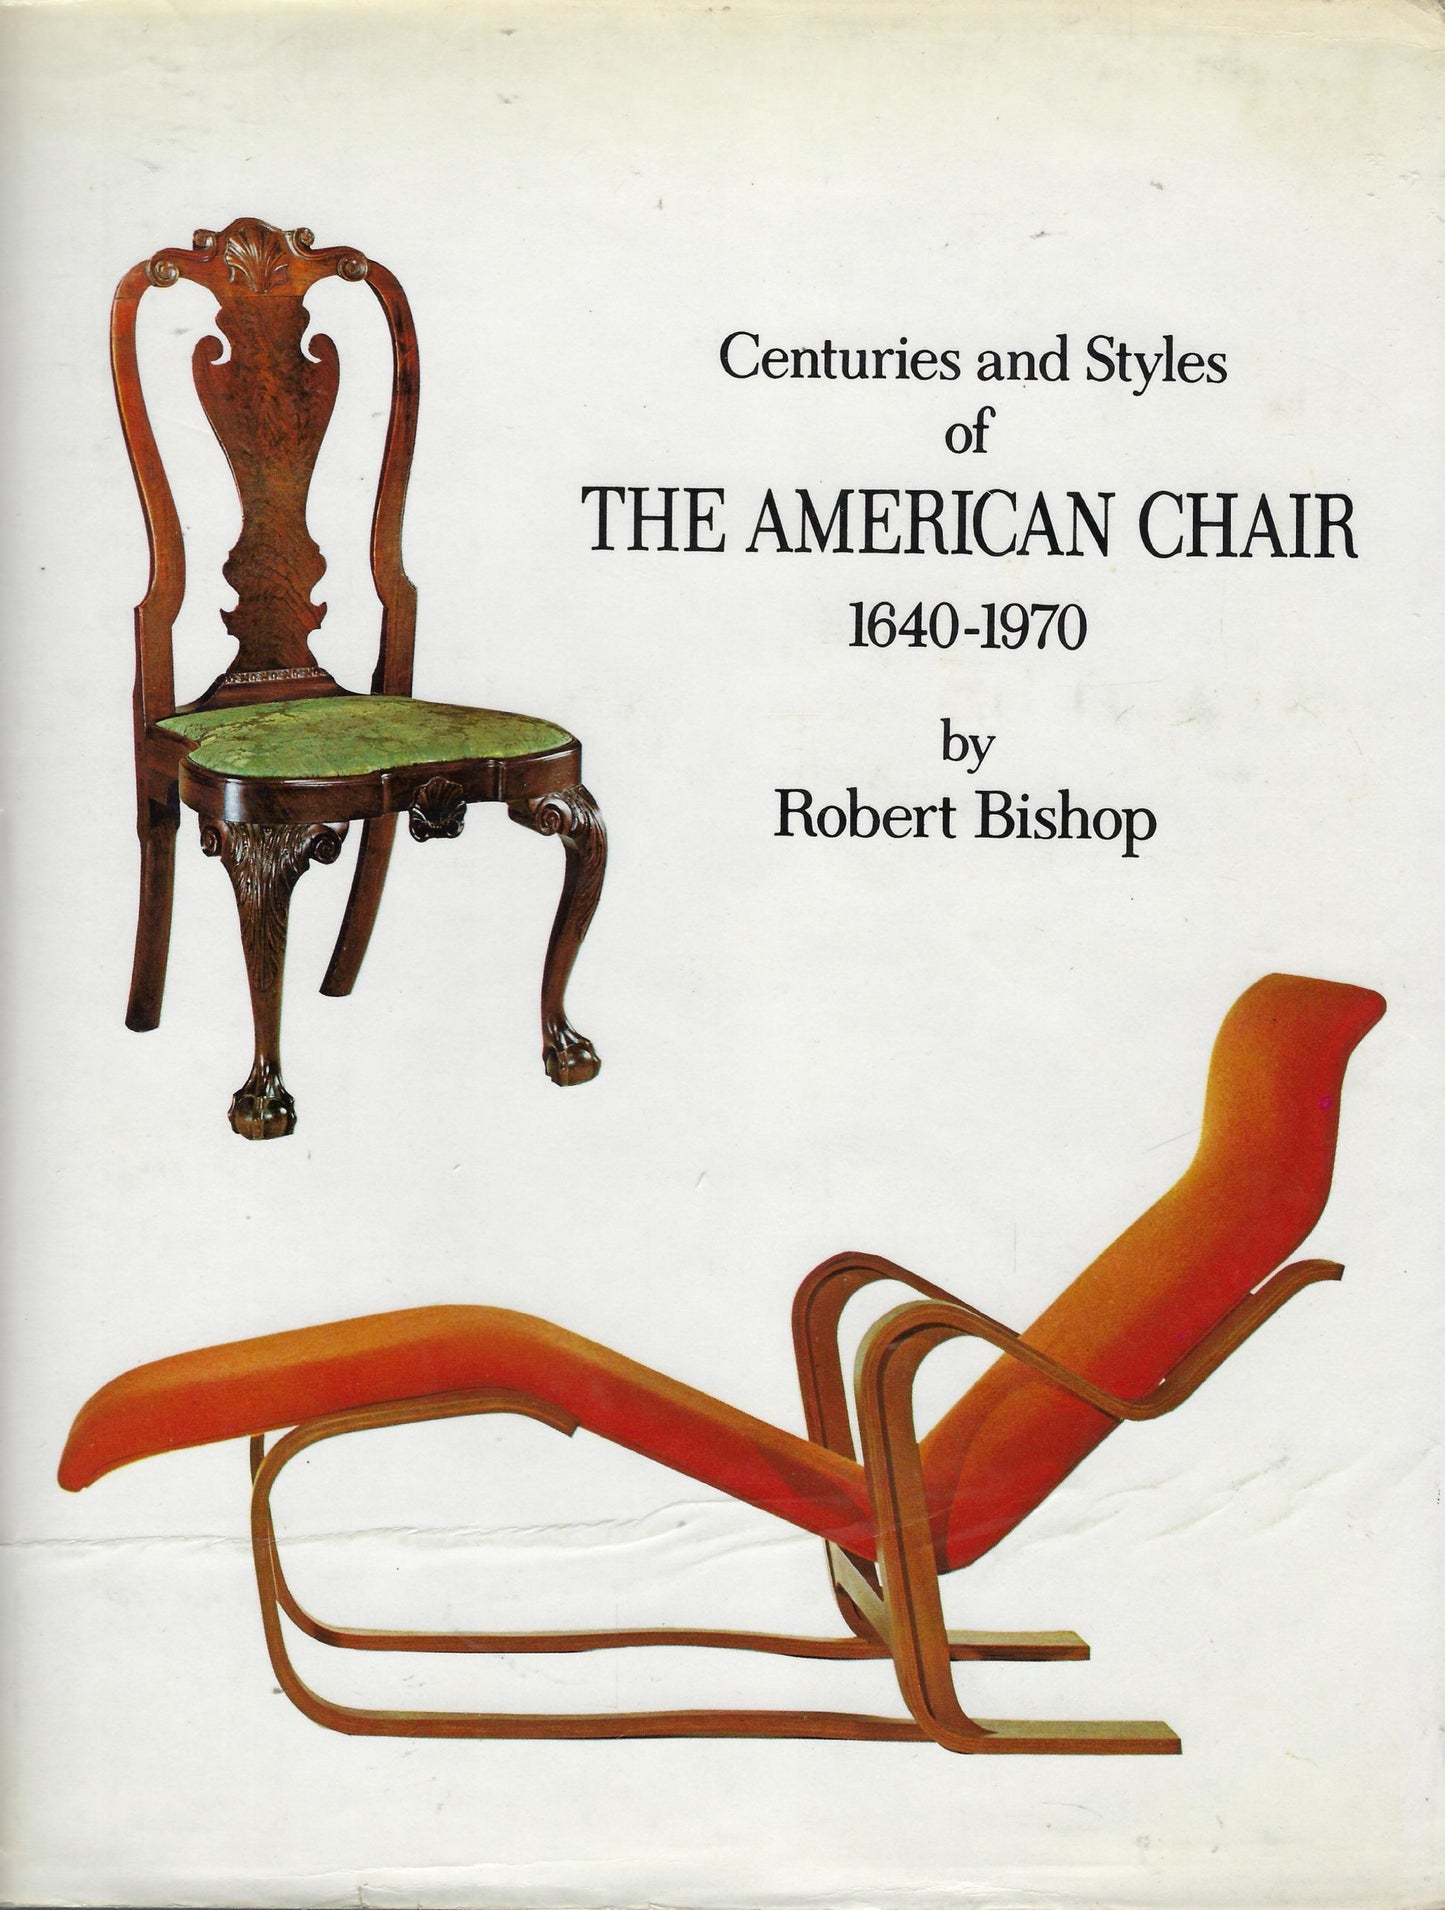 Centuries and styles of the American chair 1640-1970